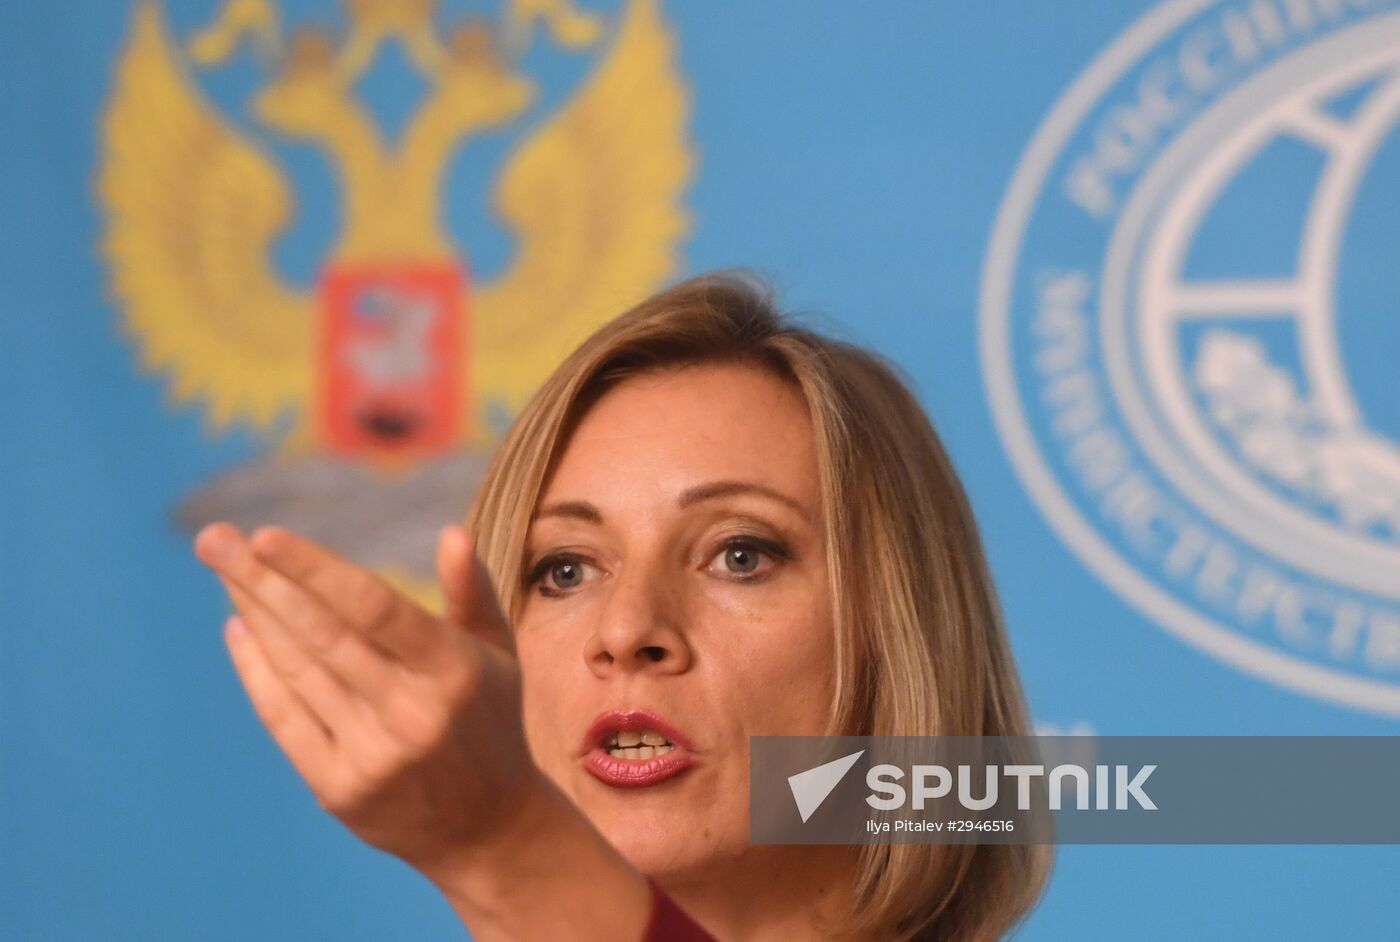 Russian Foreign Ministry Spokesperson Maria Zakharova's briefing on current foreign policy issues.